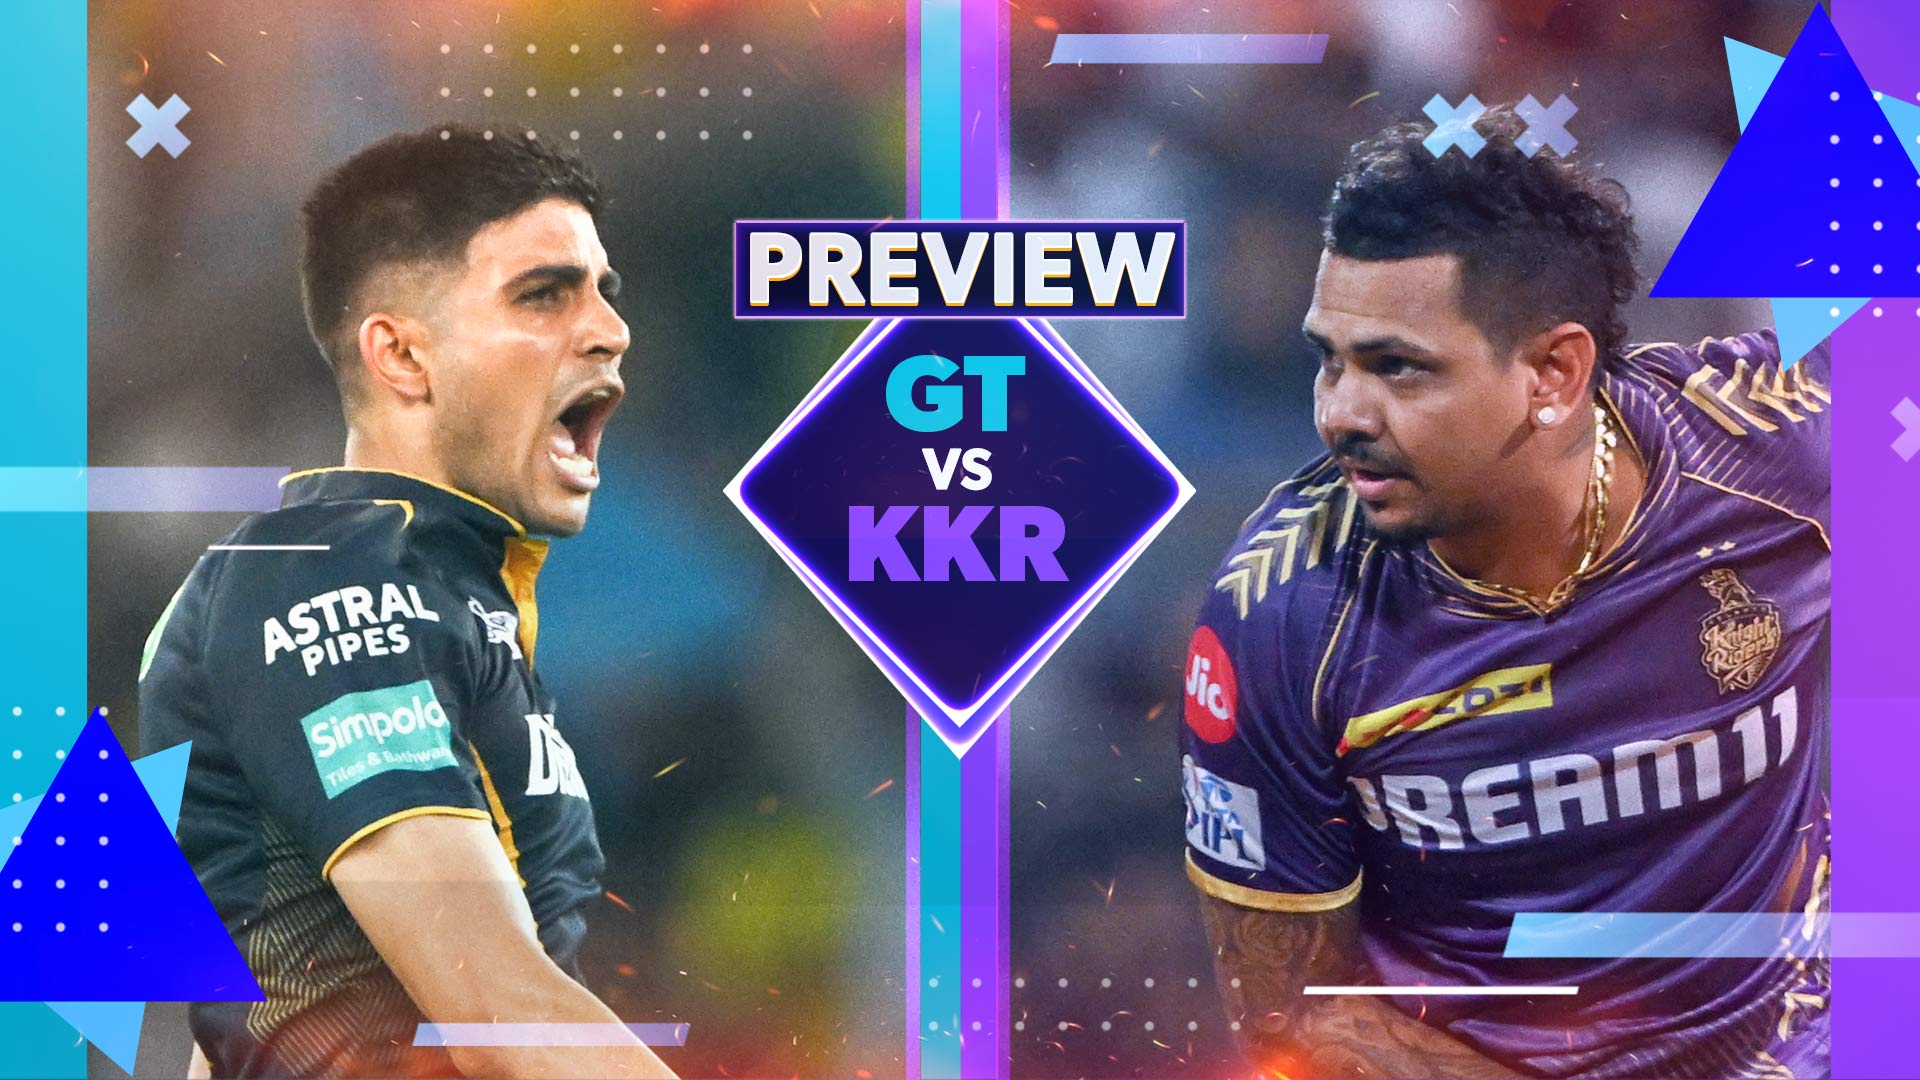 GT vs KKR: All You Need to Know